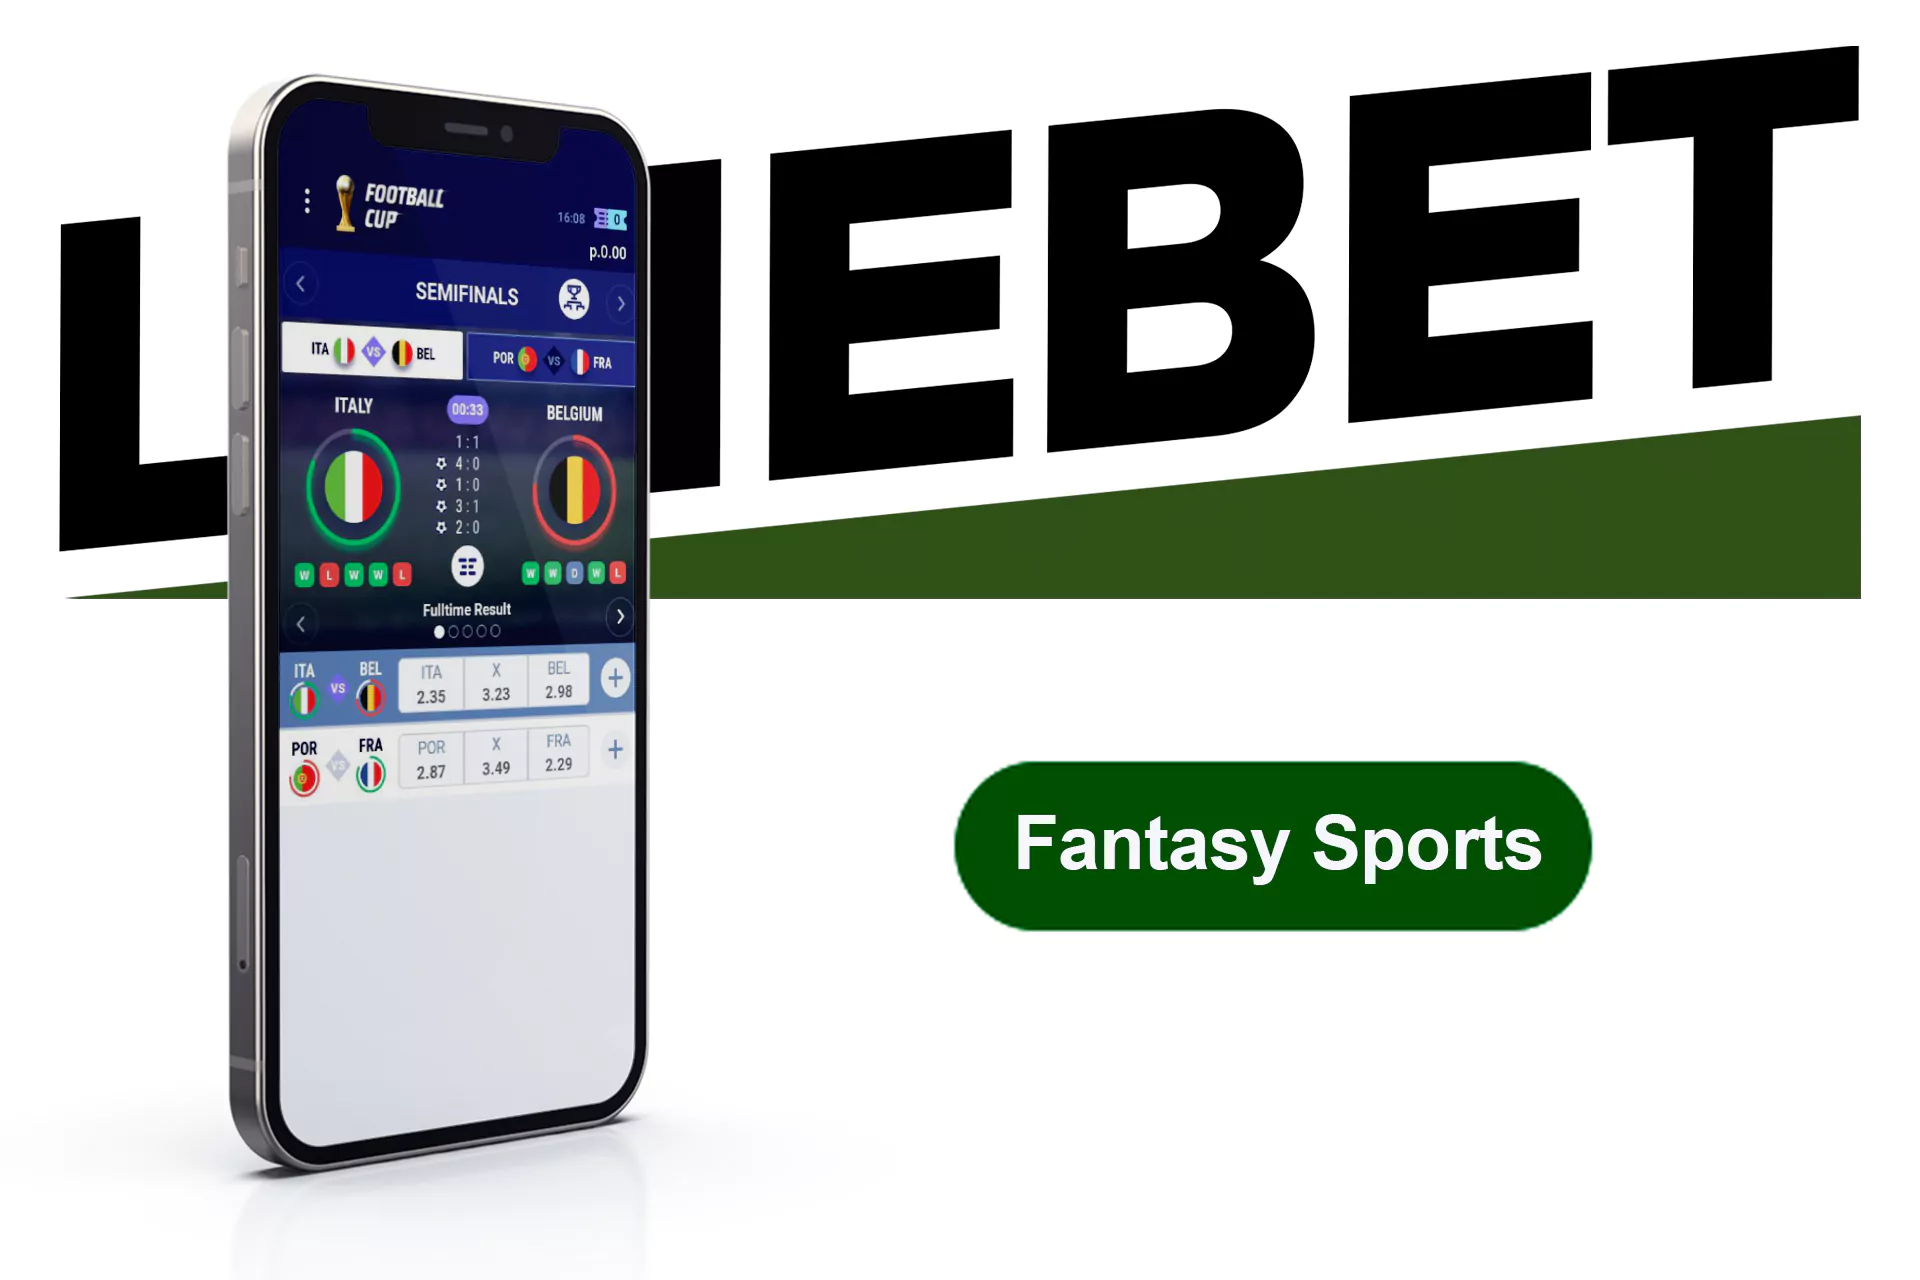 You can create your own team in Fantasy Sports.